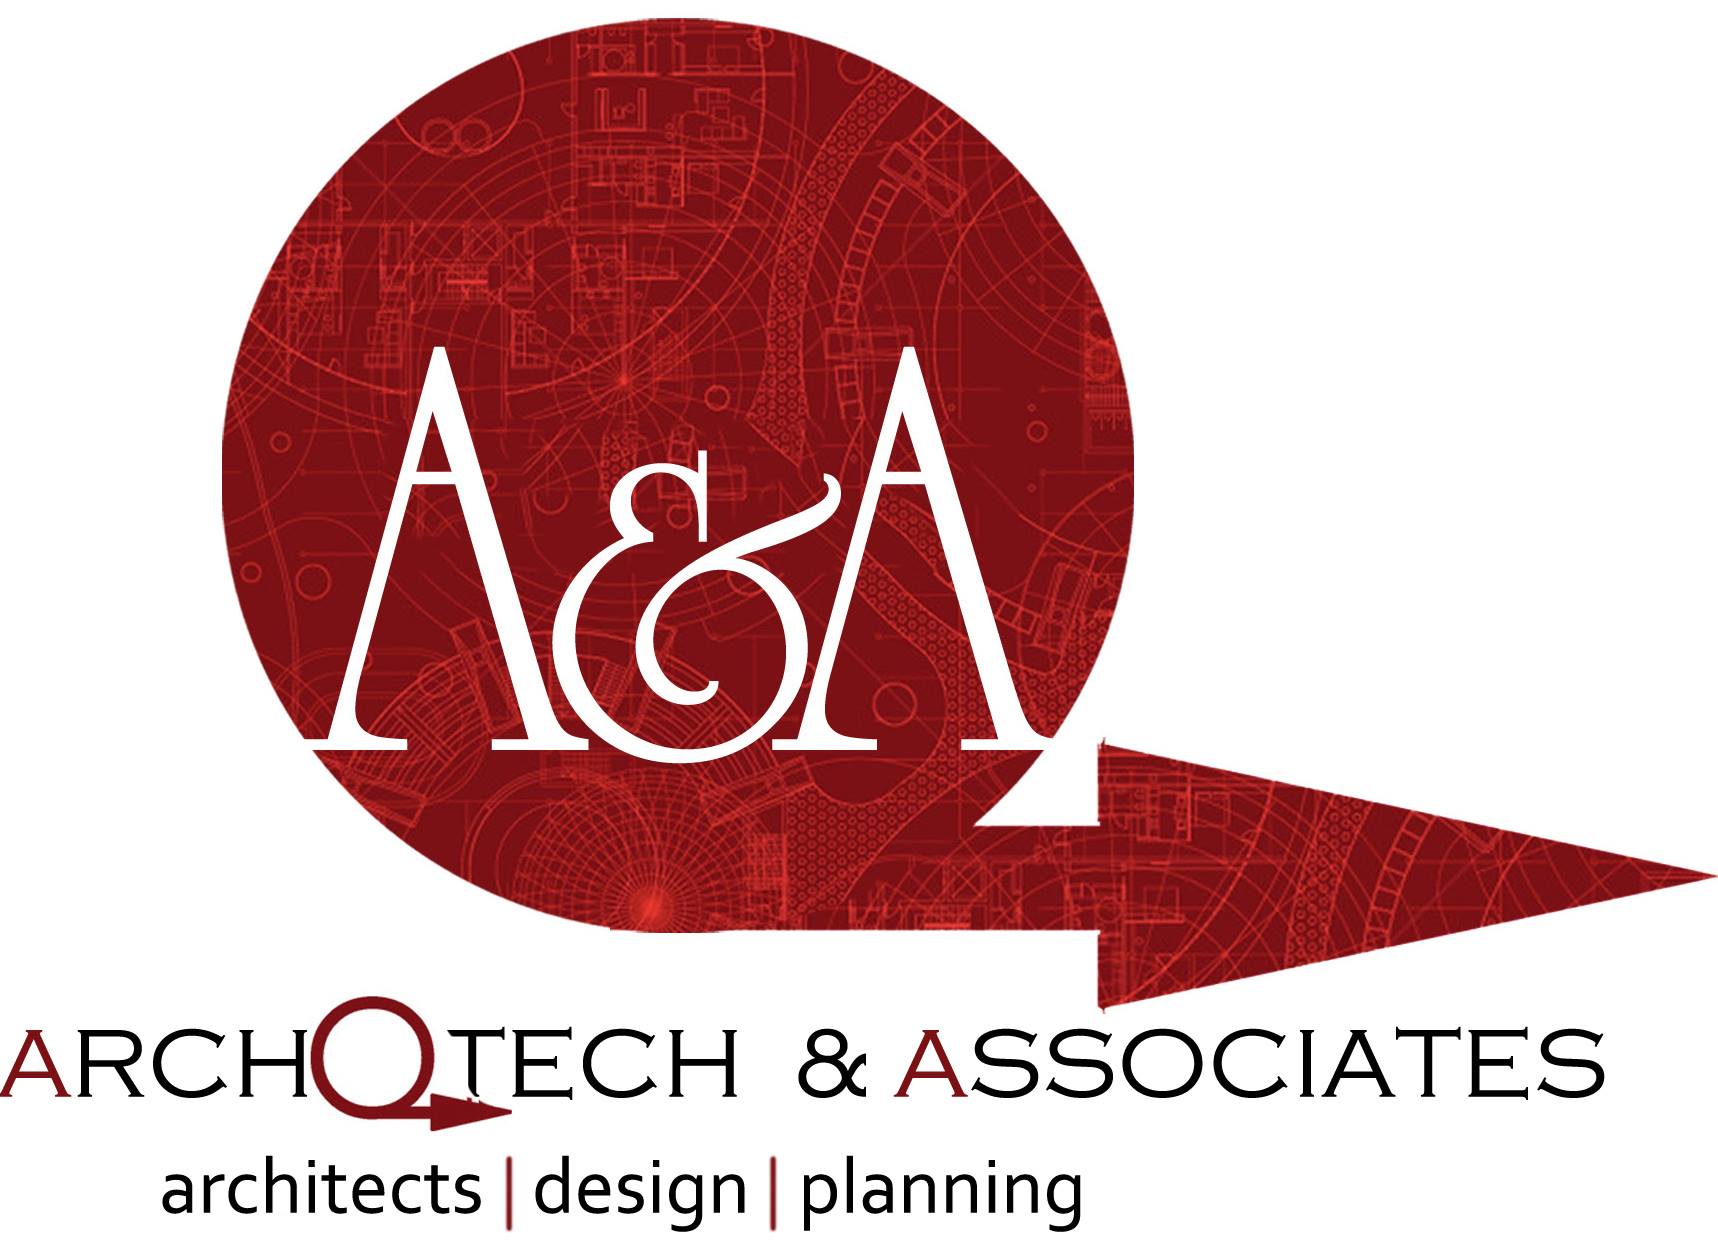 Archotech and associates (Architect)|Accounting Services|Professional Services